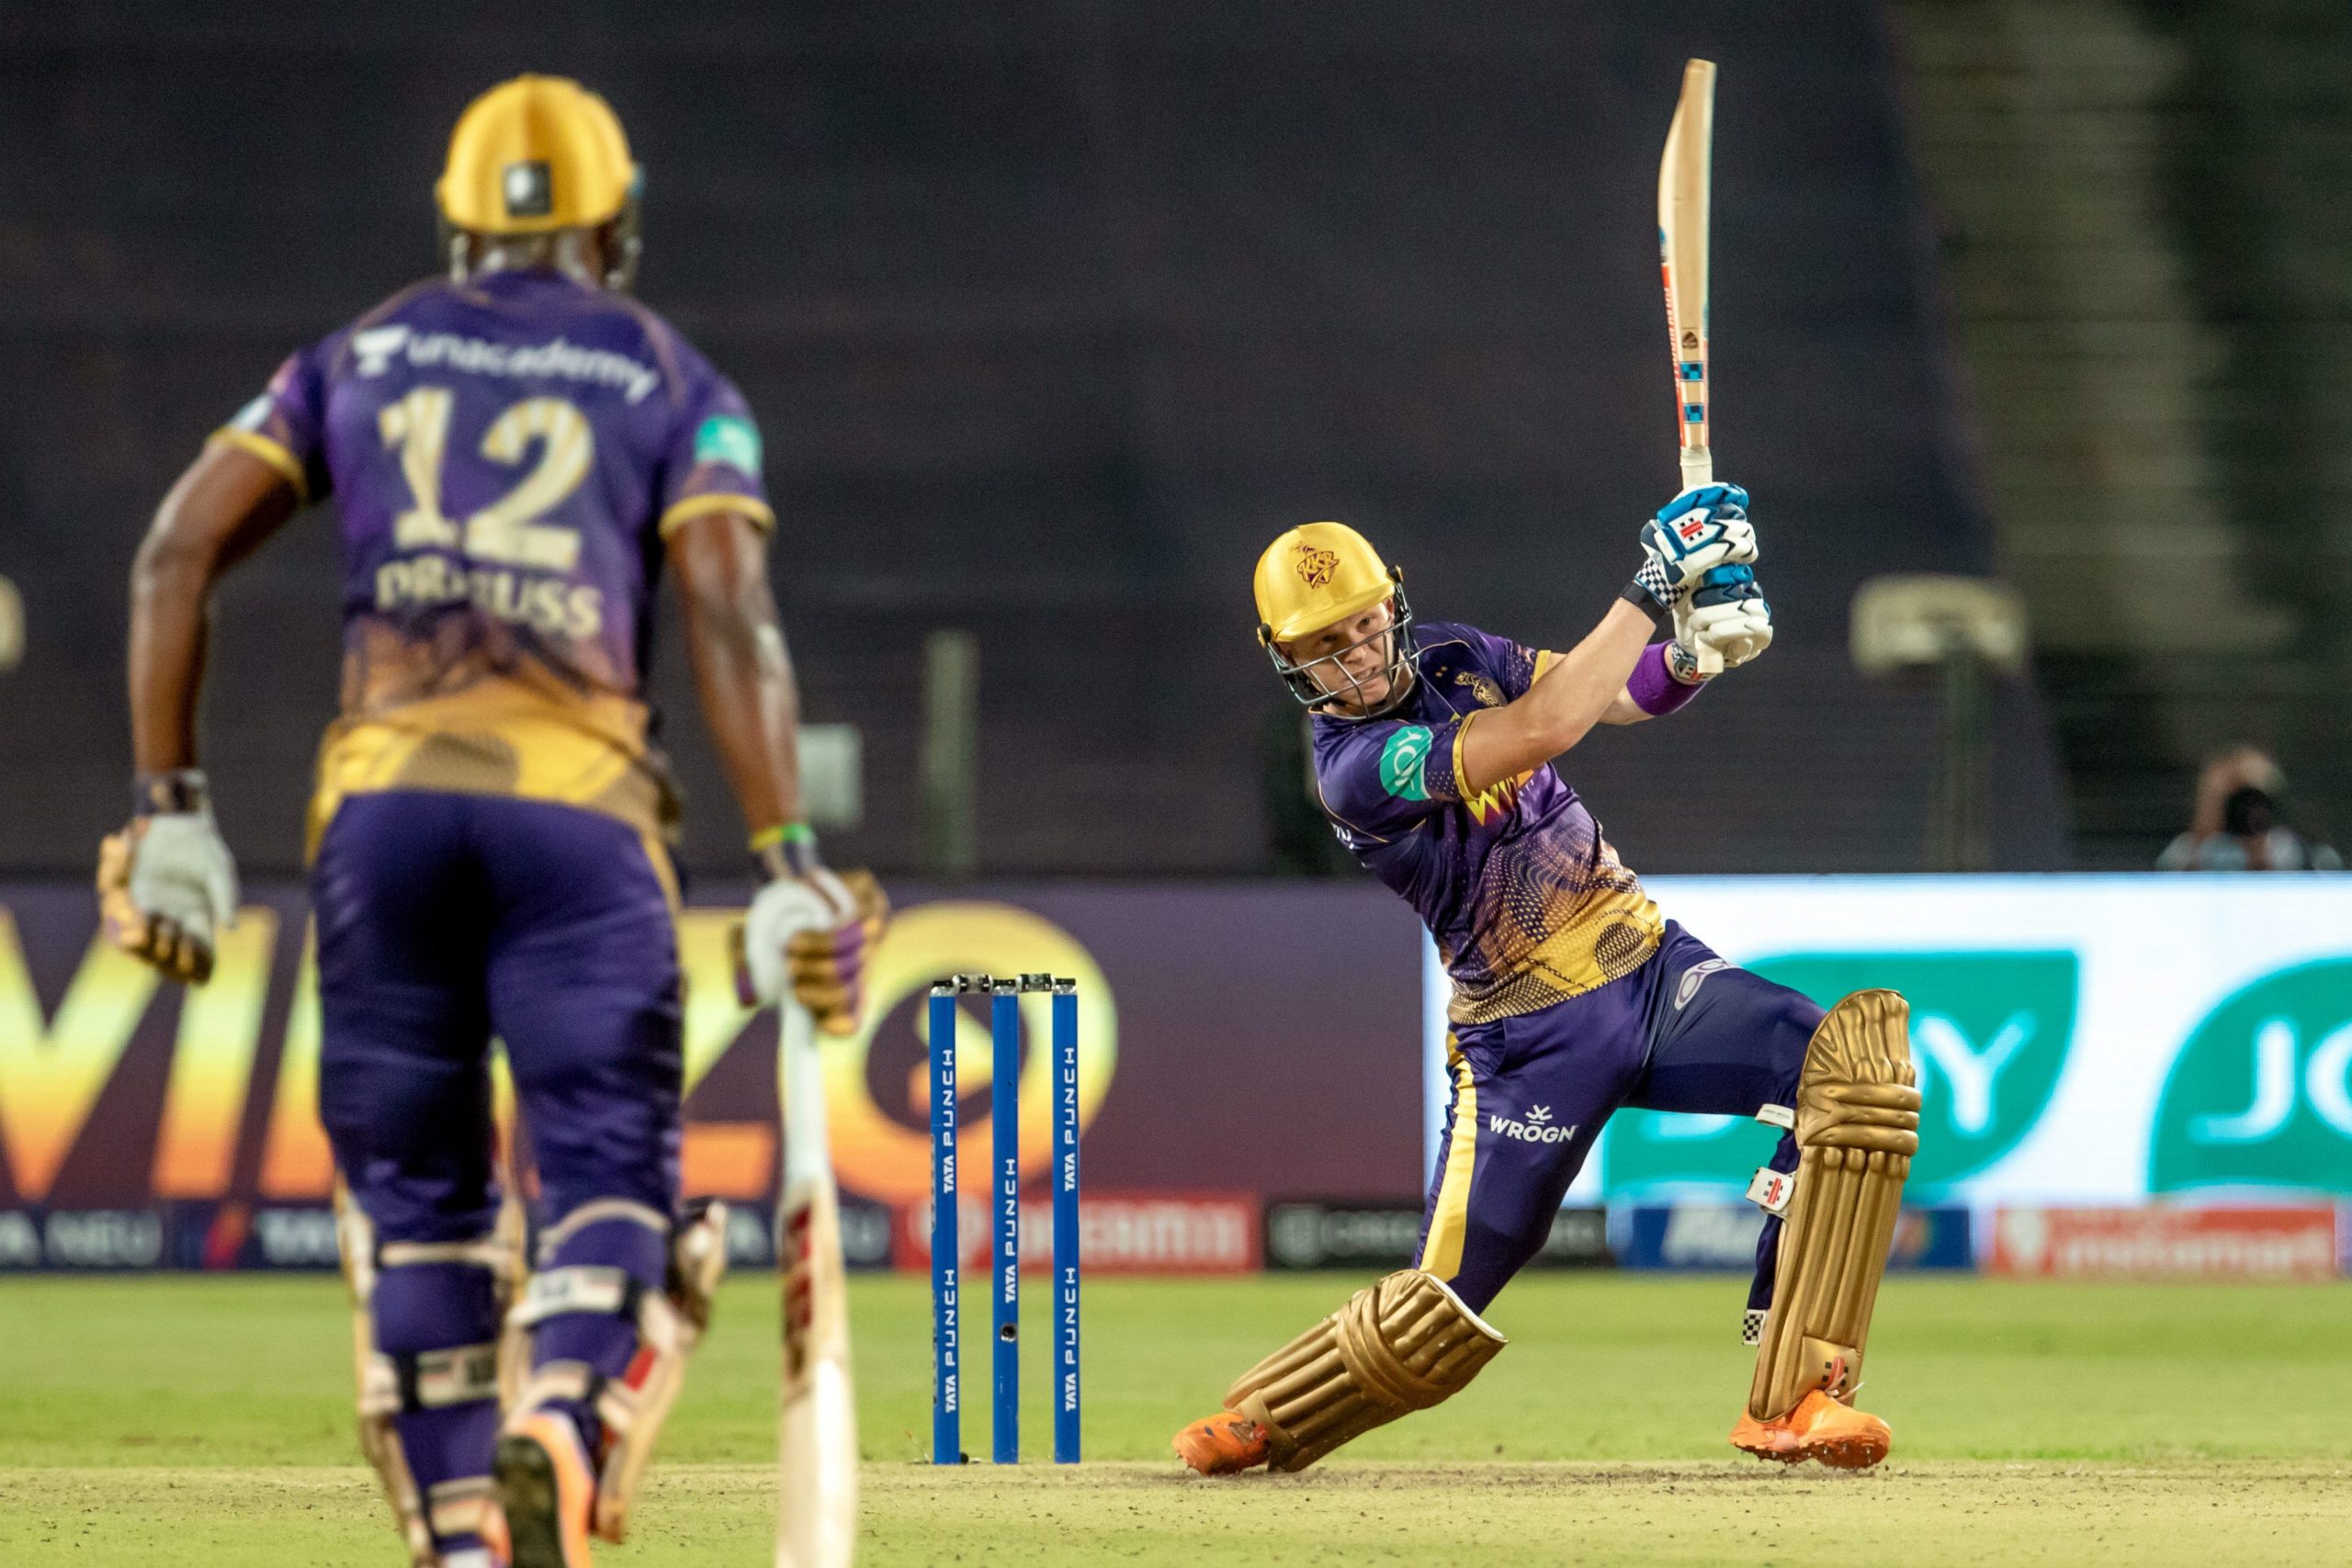 IPL 2022: Andre Russell’s all-round show helps KKR beat Sunrisers Hyderbad